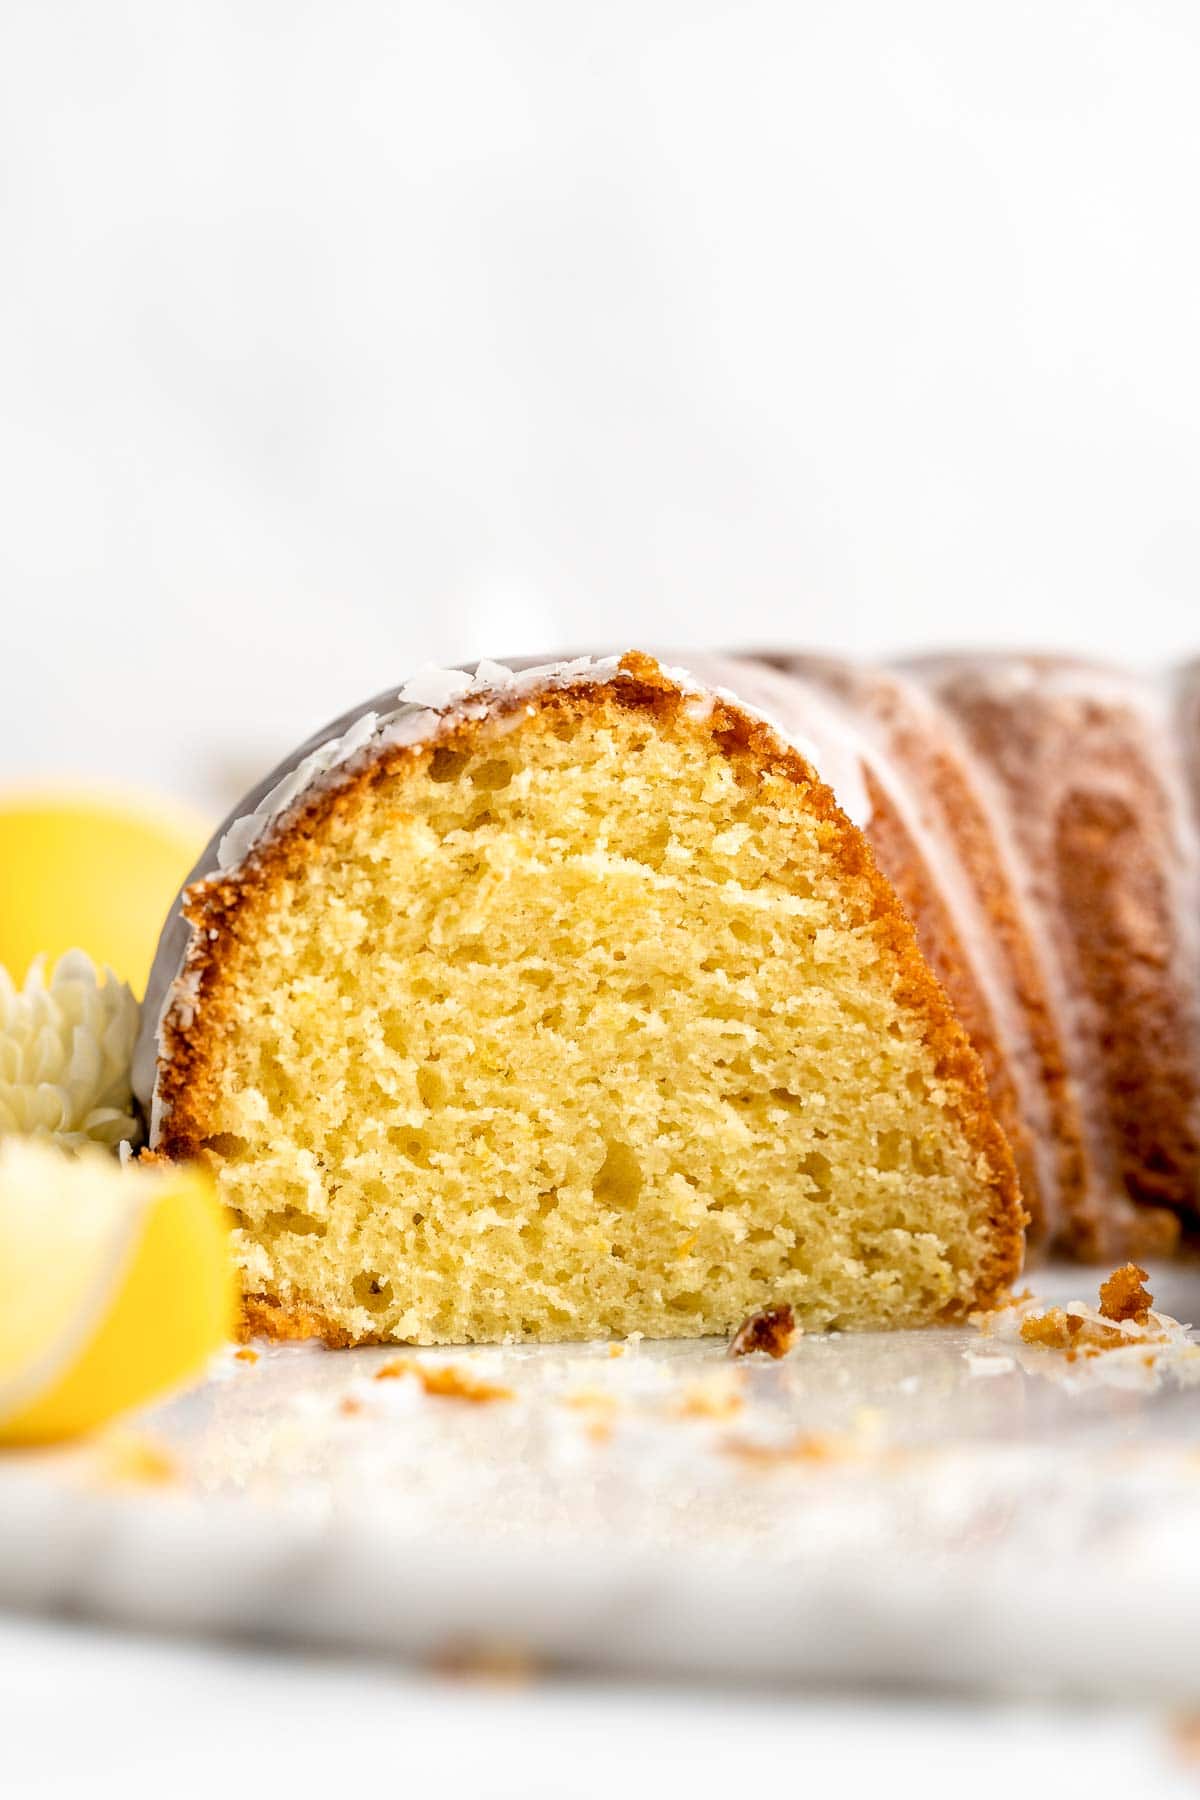 Lemon Bundt Cake with a sweet vanilla glaze is light, fluffy, and moist with a perfect golden brown crumb and made with real lemons. | aheadofthyme.com